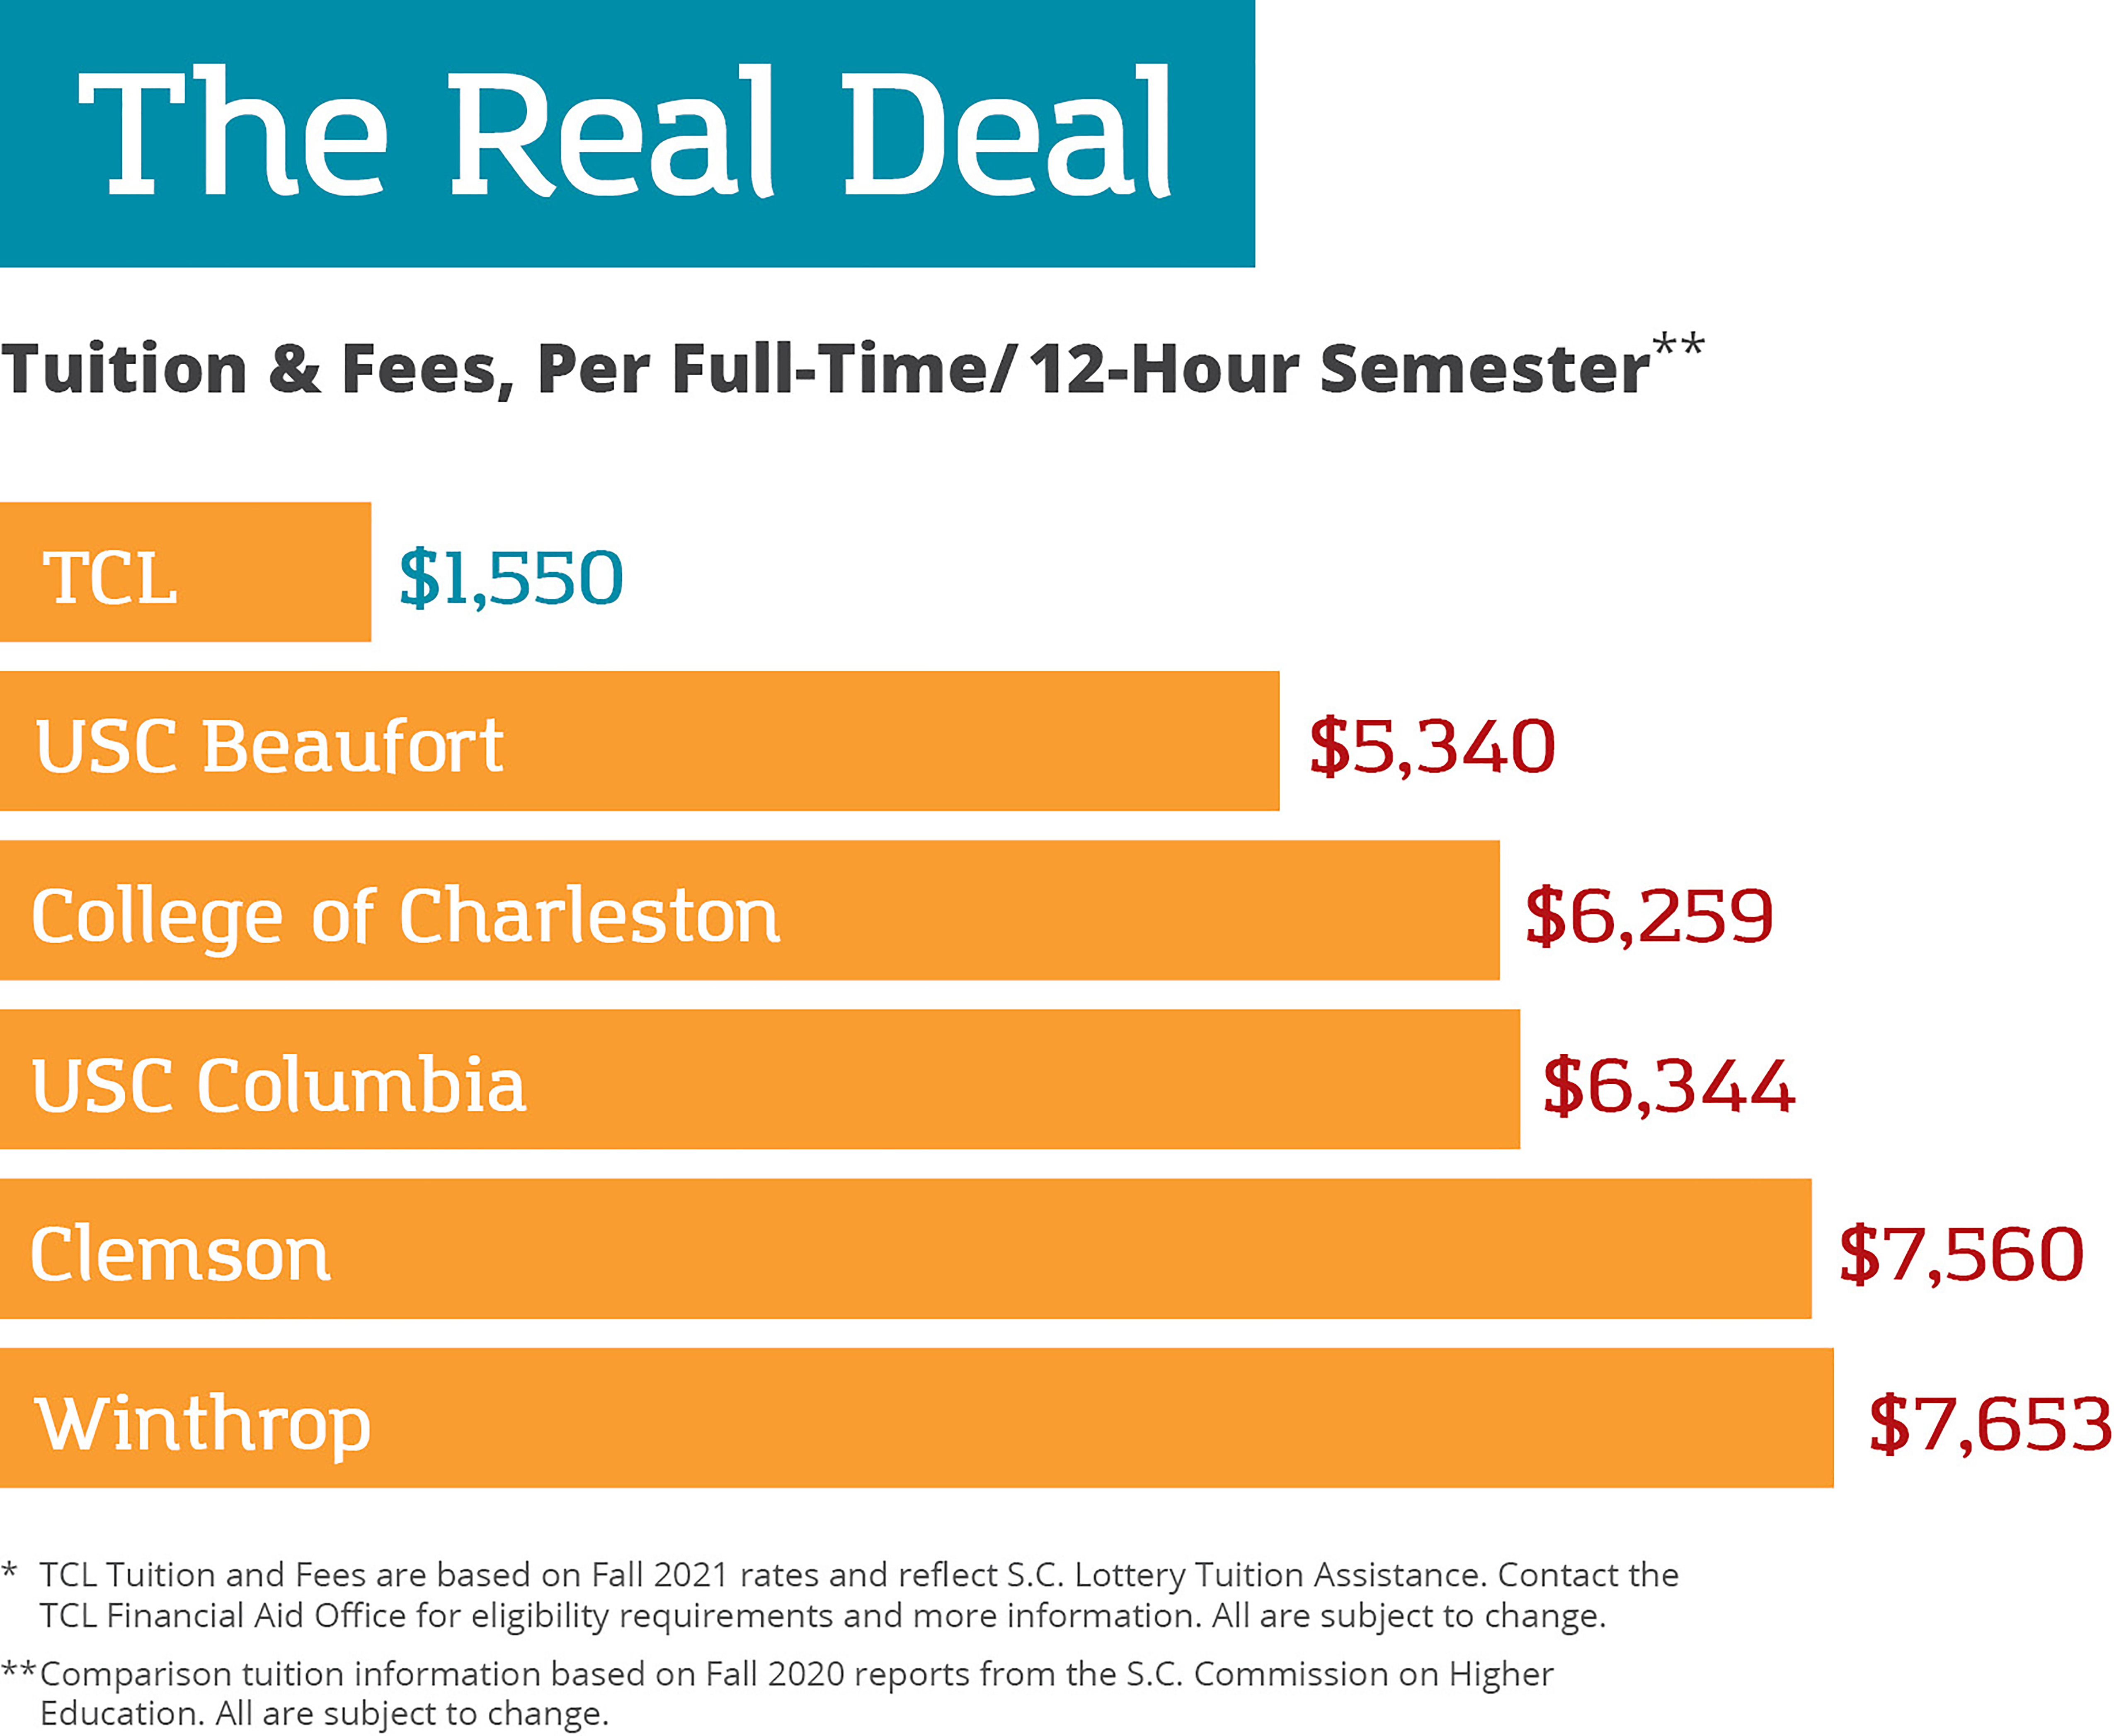 The Real Deal. Tuition Comparison. Tuition and fees, per full-time/12-hour semester at TCL is $1,550; at USC Beaufort is $5,340; at USC Columbia is $6,344; at College of Charleston is $6,259; at Clemson is $7,560; at Winthrop is $7,653. Comparison tuition information is based on Fall 2020reports from the South Carolina Commission on Higher Education. All are subject to change. TCL tuition and fees are based on Fall 2021 rates and reflect South Carolina Lottery Tuition Assistance. Contact the TCL Financial Aid Office for eligibility requirements and more information. All are subject to change.